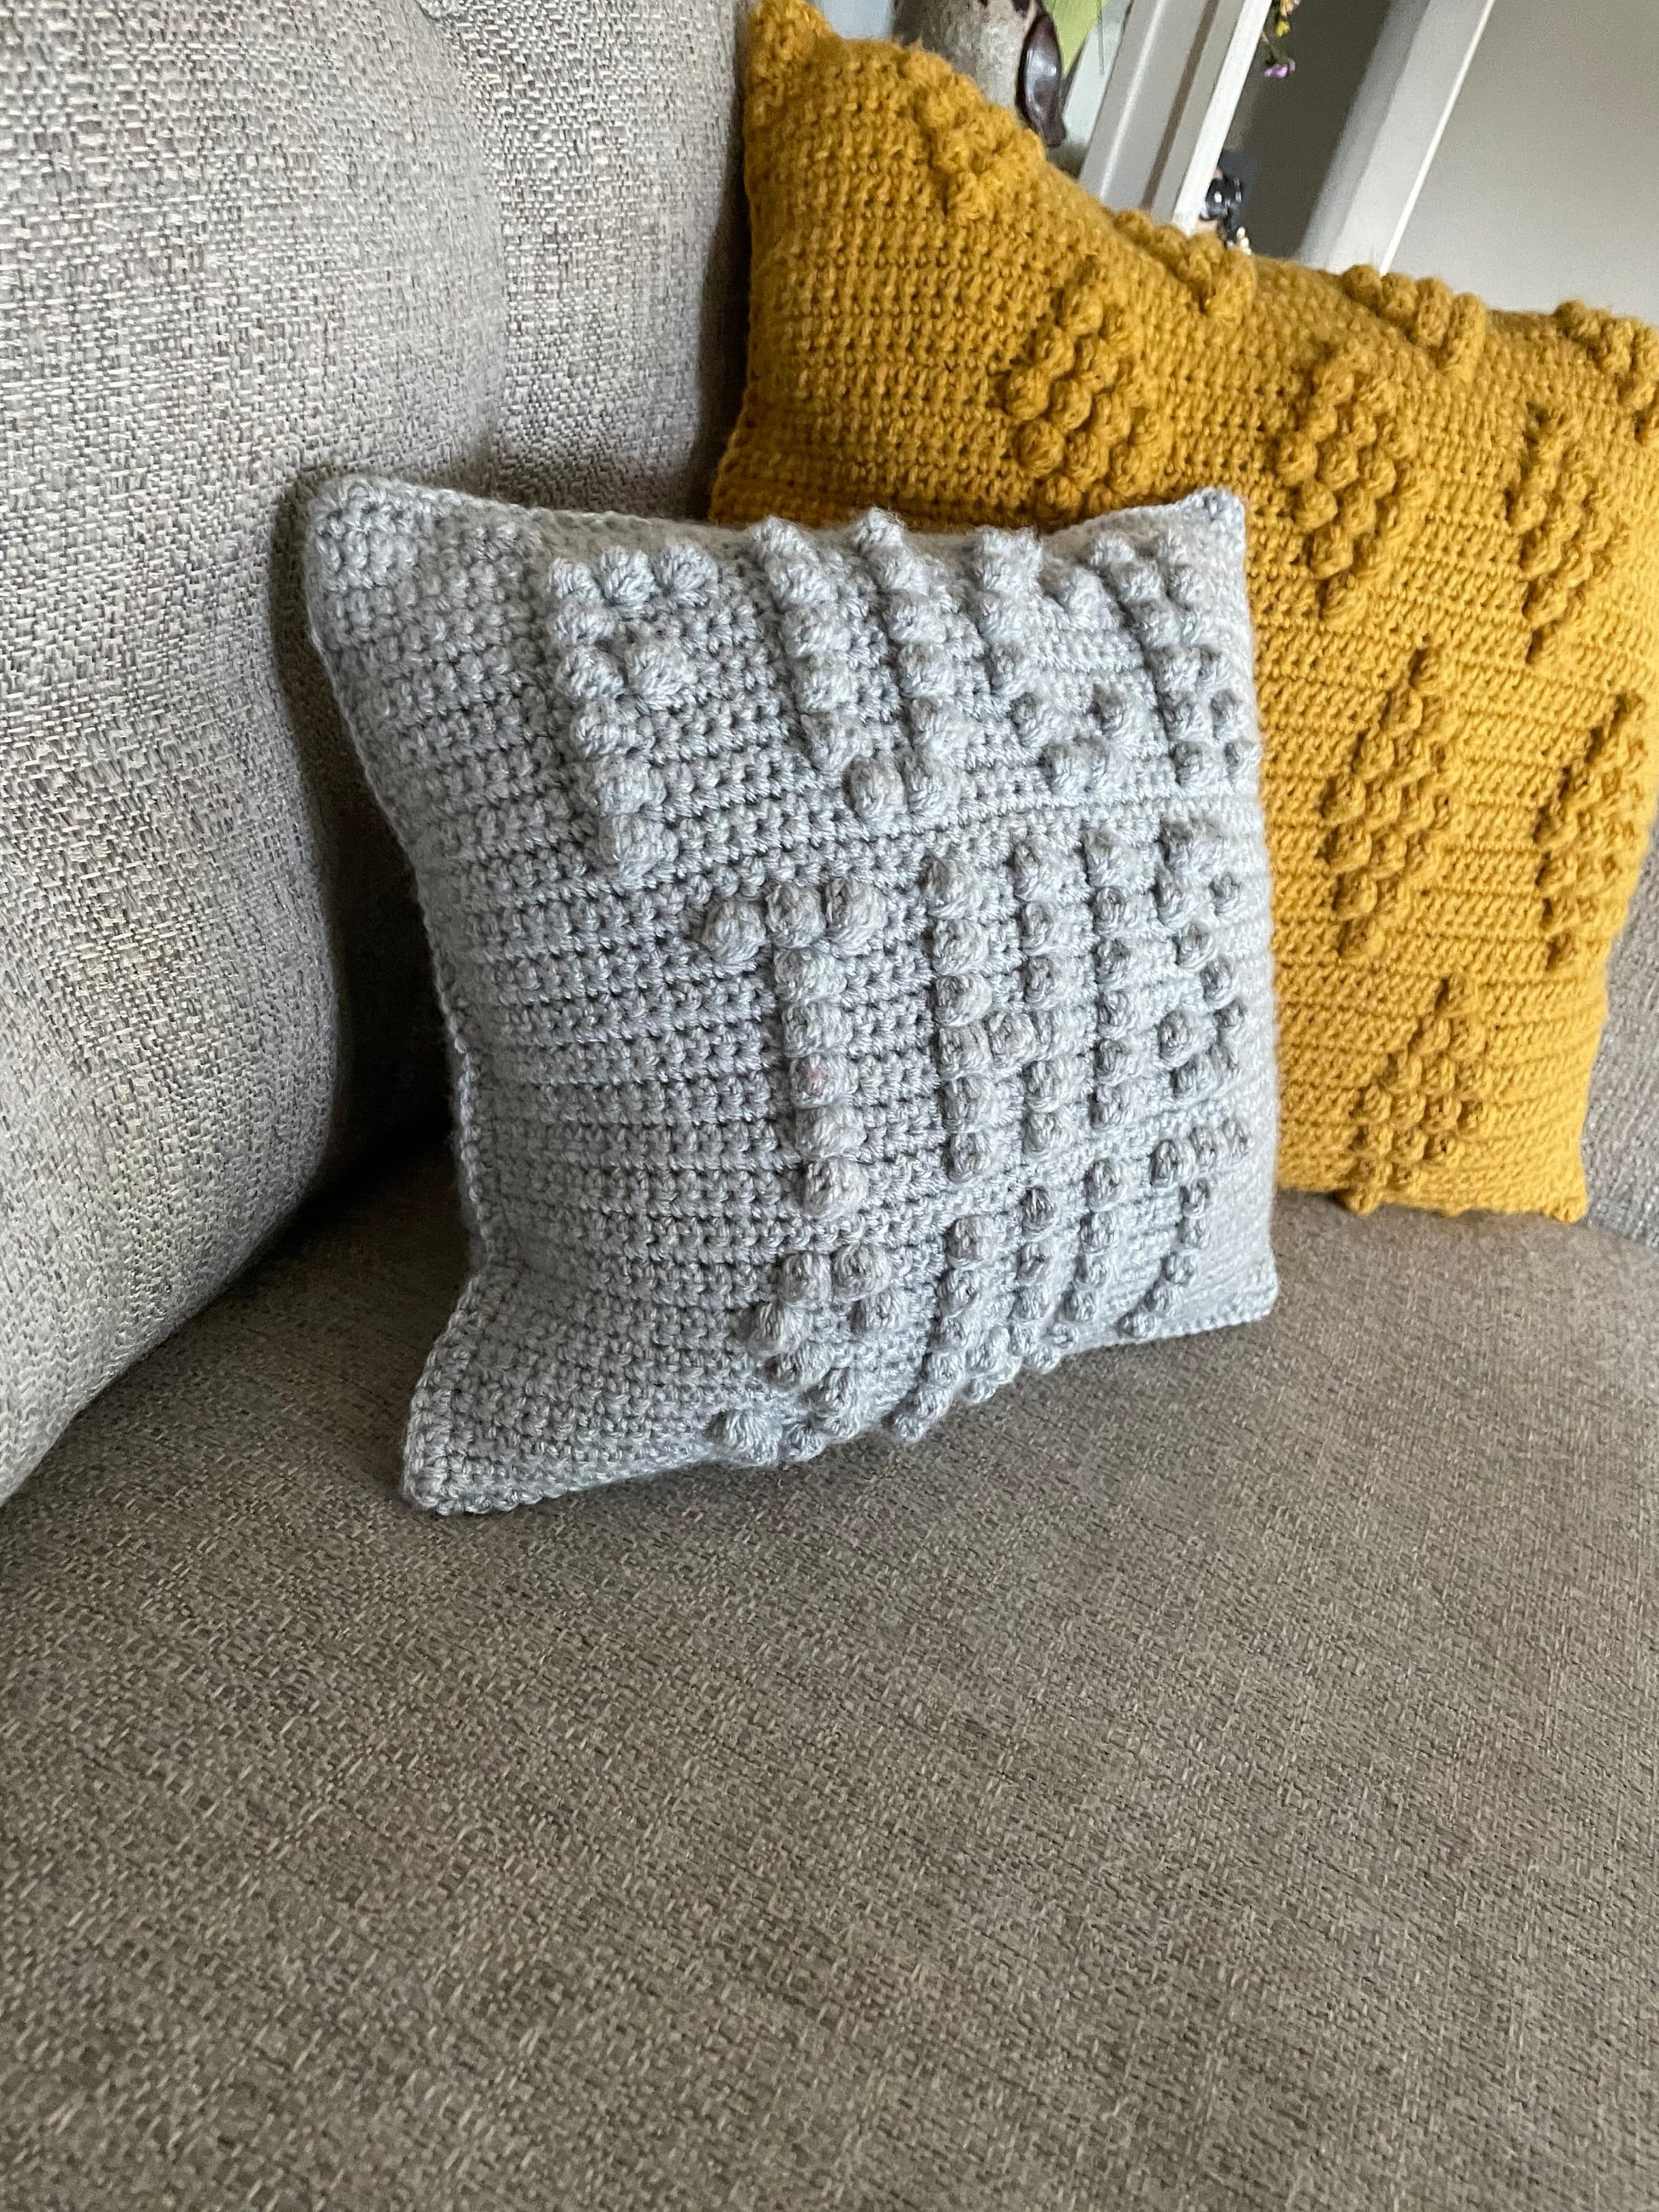 CROCHET PATTERN- F This S Pillow, Fuck Pillow, Fuck This Shit